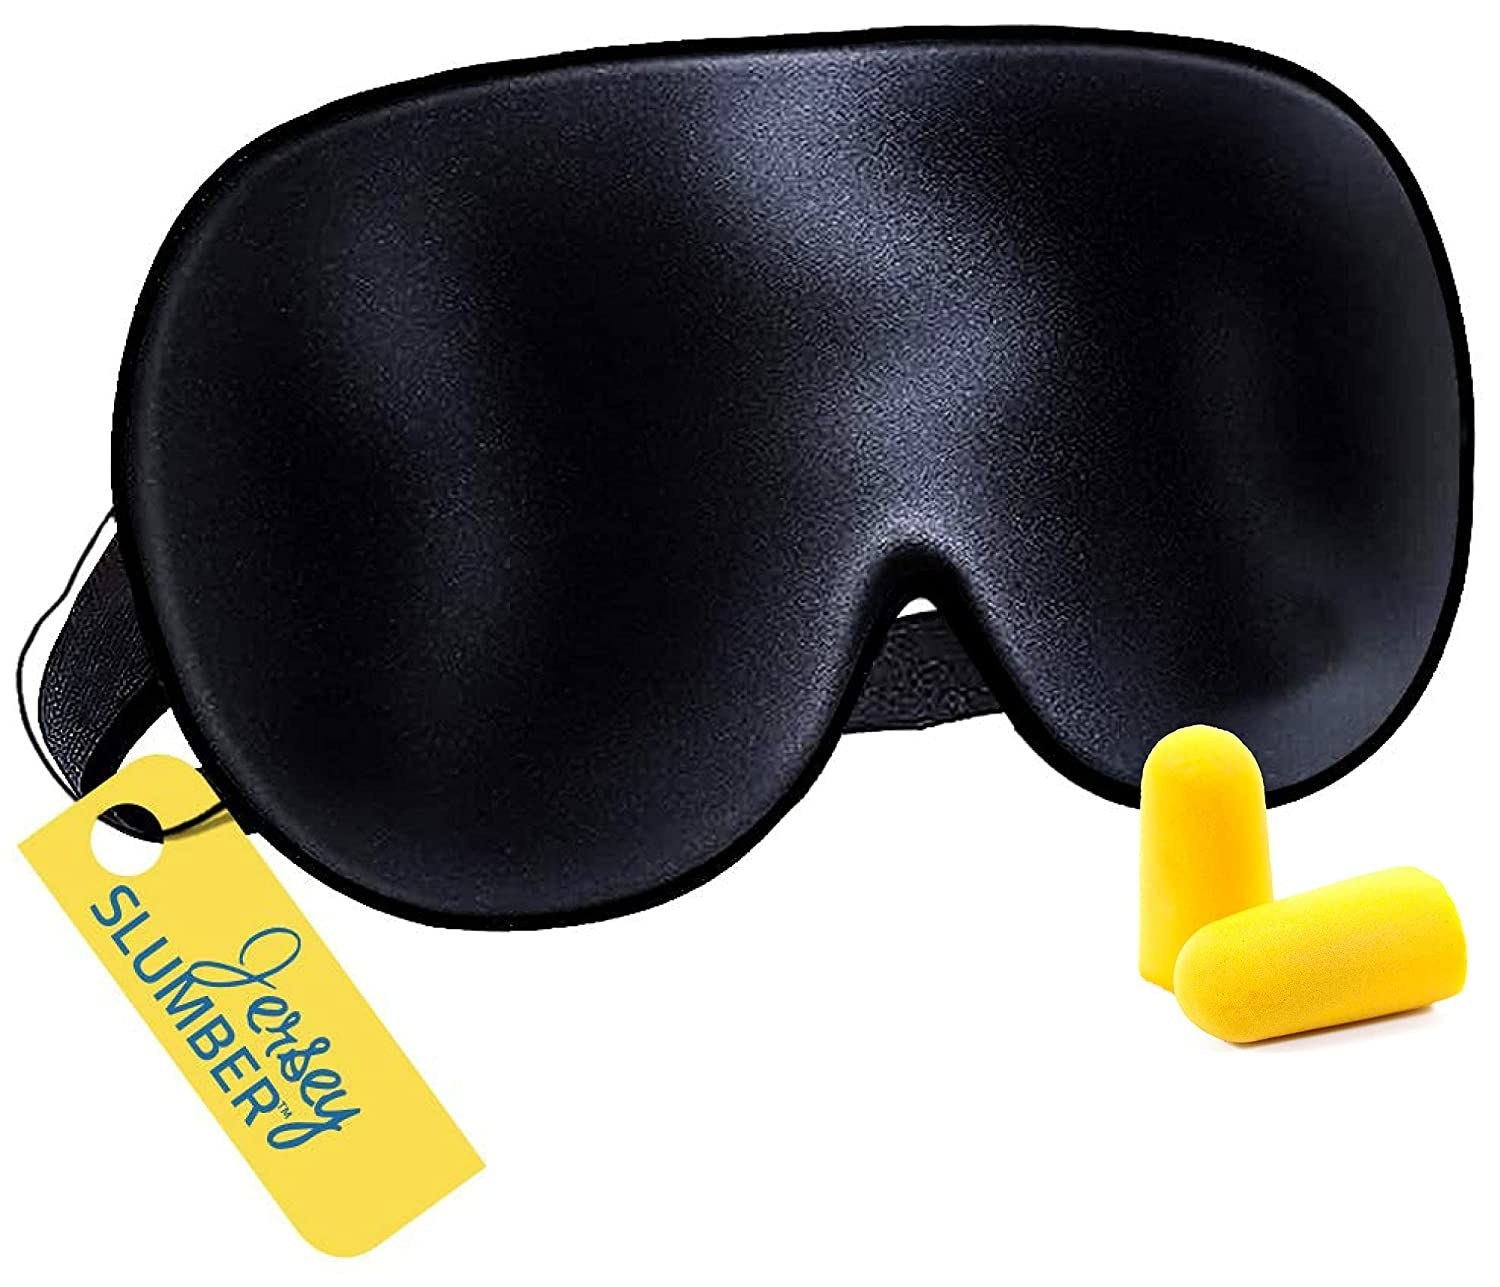 black sleeping mask and yellow earbuds